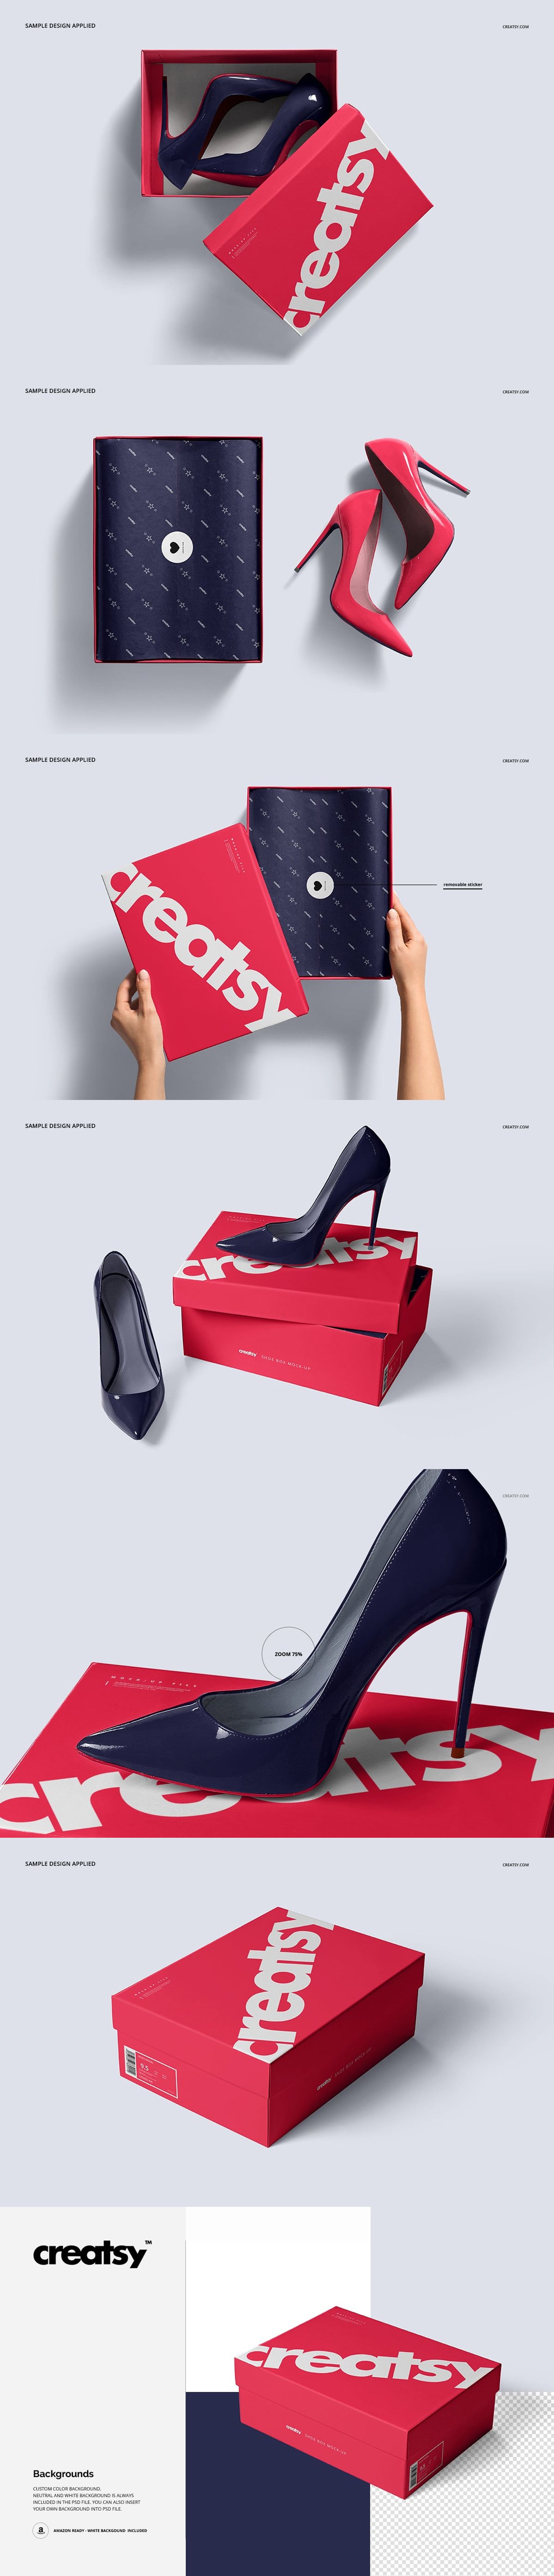 Download Shoe Box Mockup Set - Find the Perfect Creative Mockups Freebies to Showcase your Project to Life